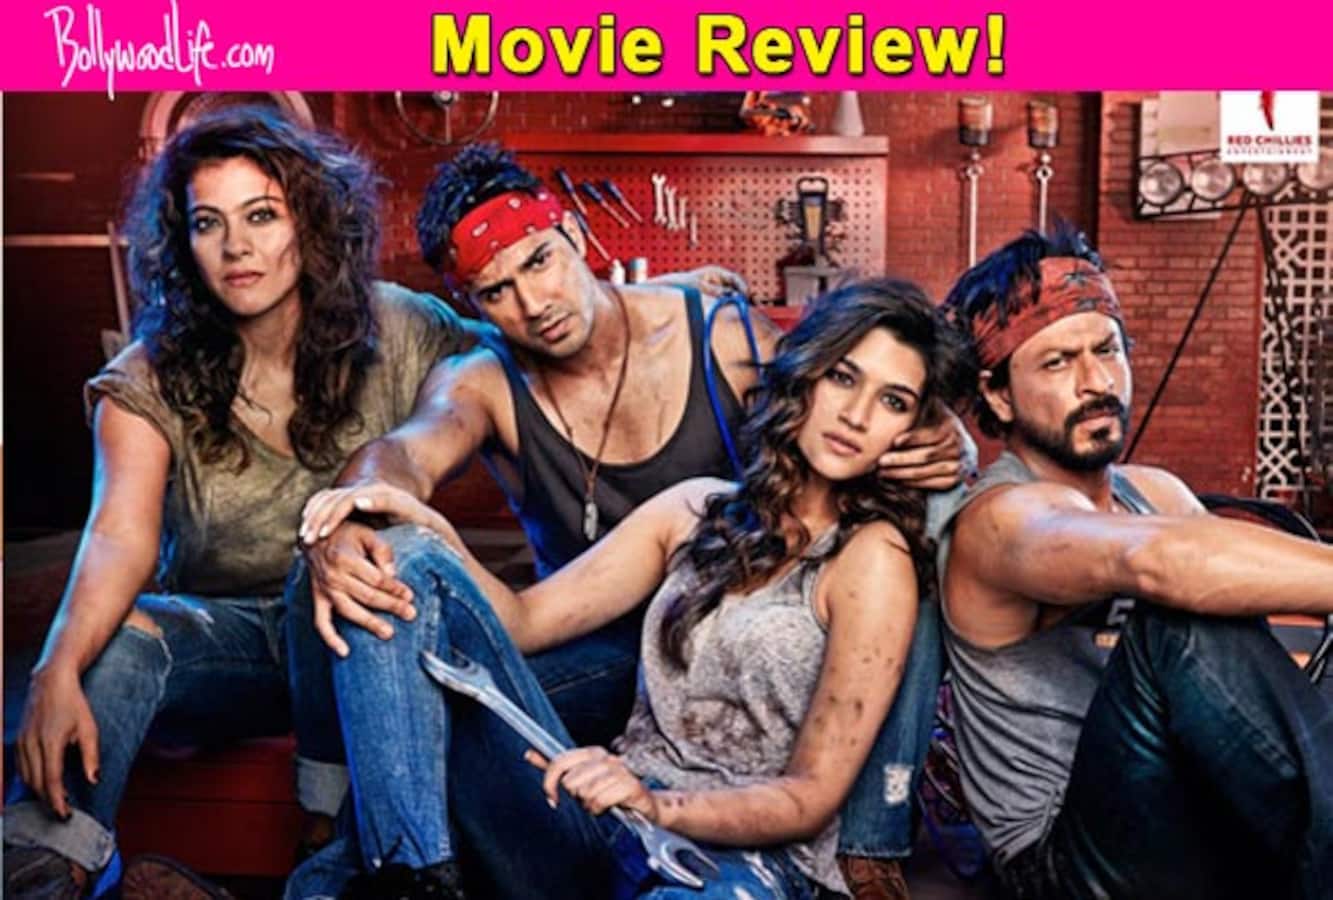 Dilwale movie review: The film is a MUST watch for Shah Rukh Khan and Kajol's chemistry and Varun Dhawan's comic act!